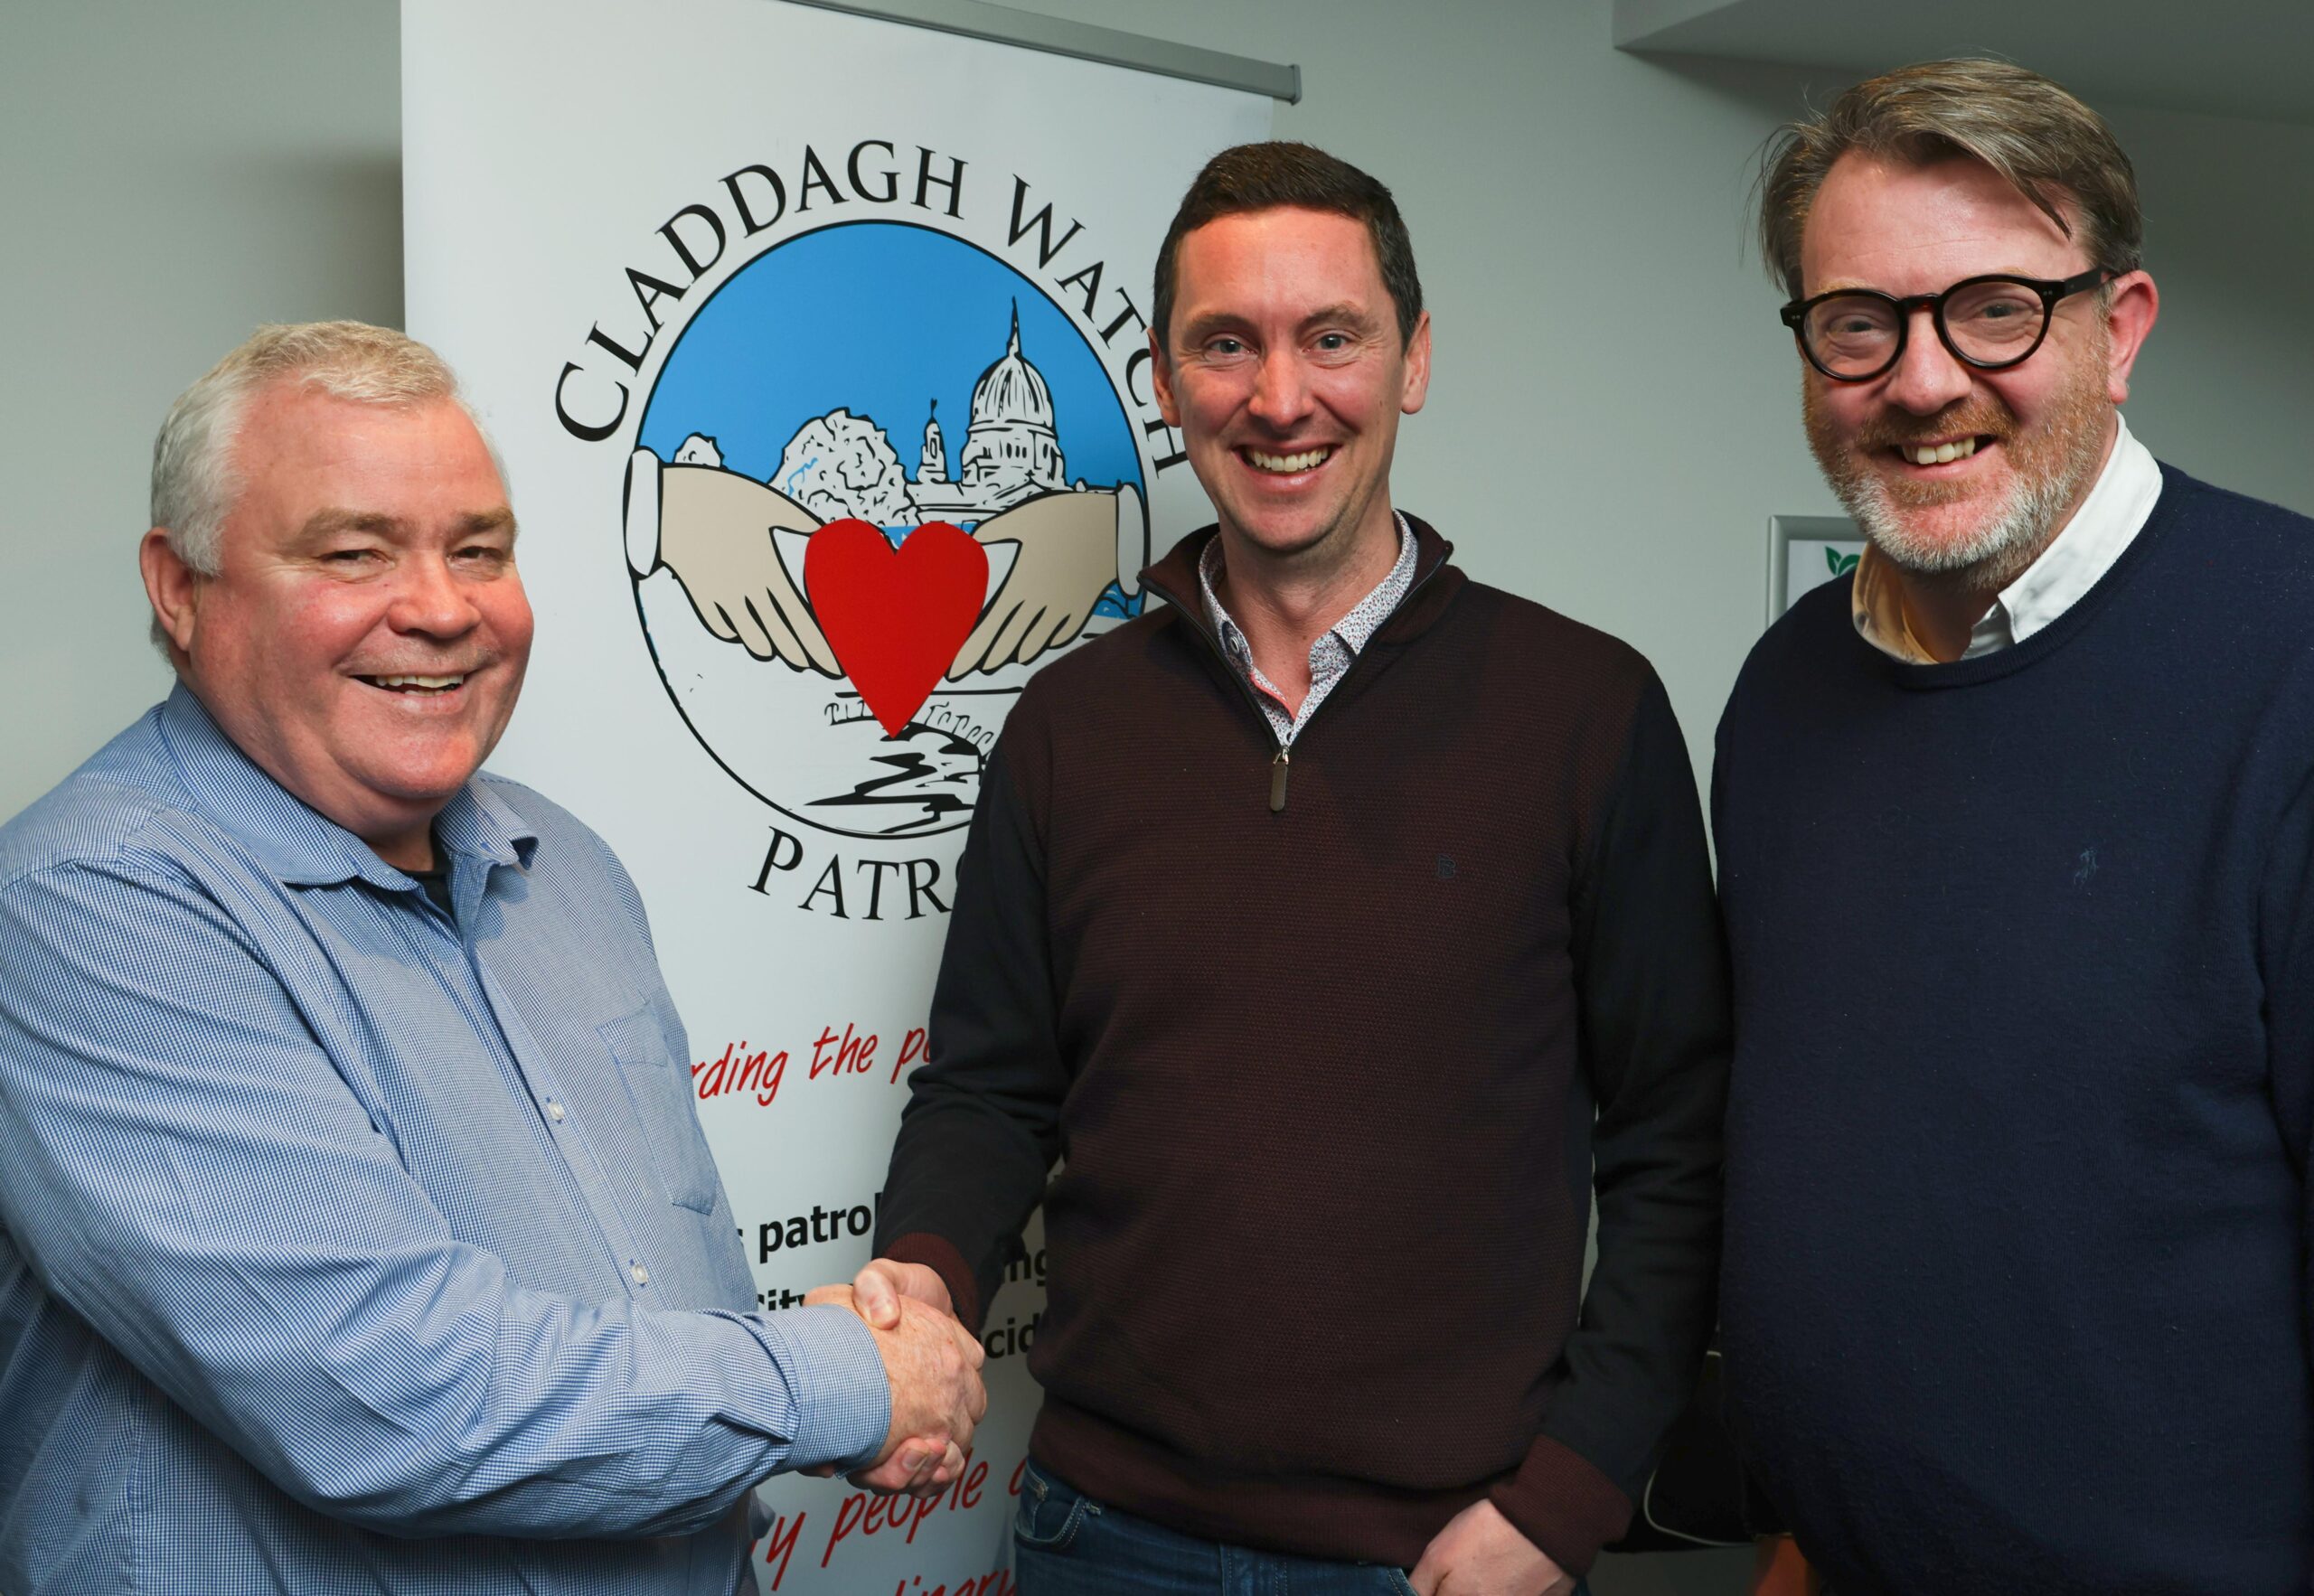 GHR Consulting announces Claddagh Watch as its Charity Partner for 2023